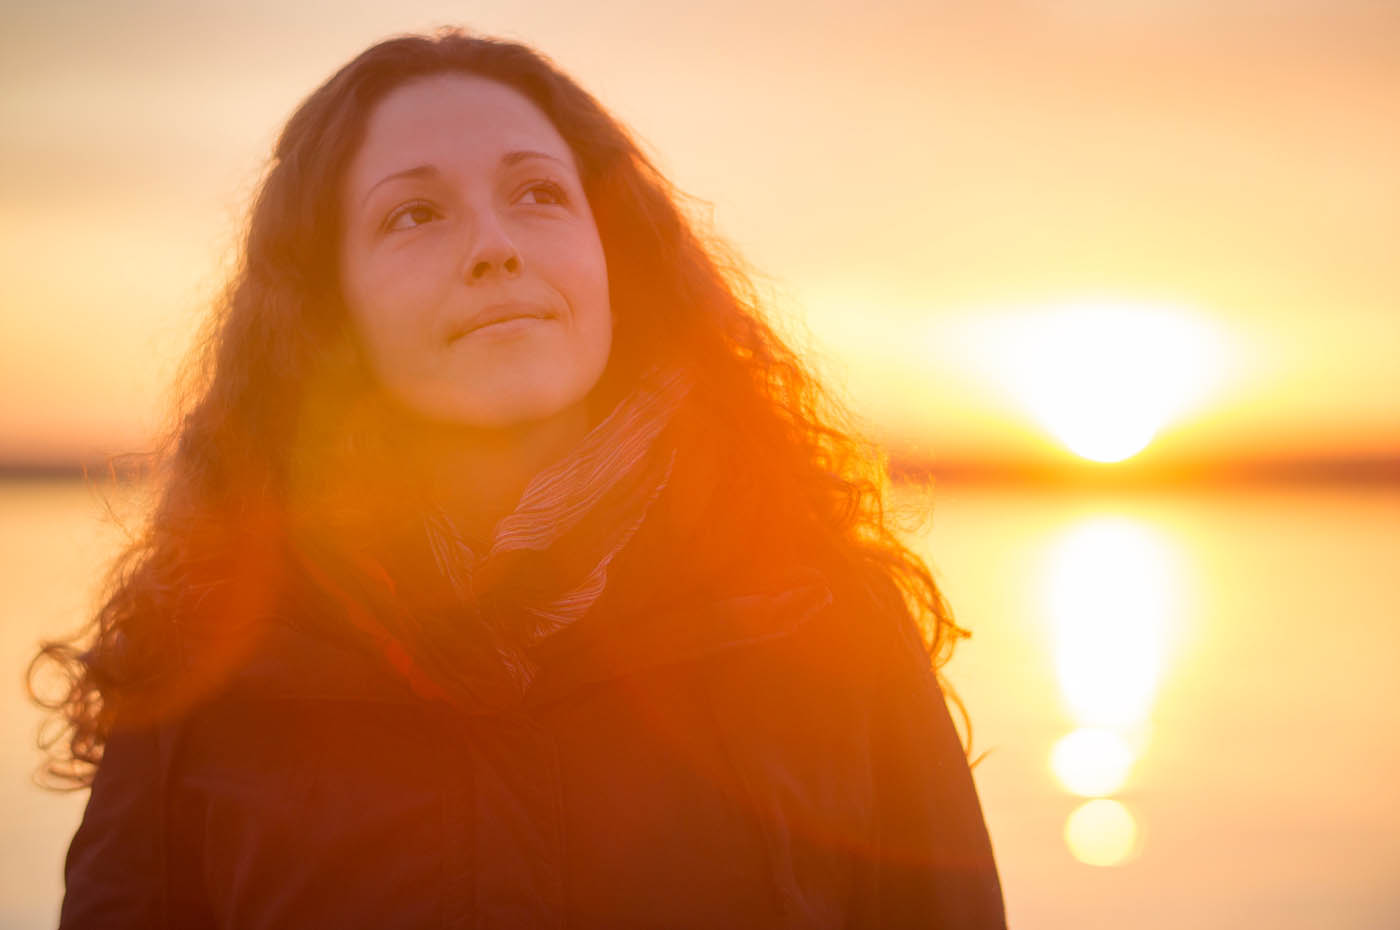 A women standing in front of a red light sunset, learn the benefits of phototherapy in your local area.